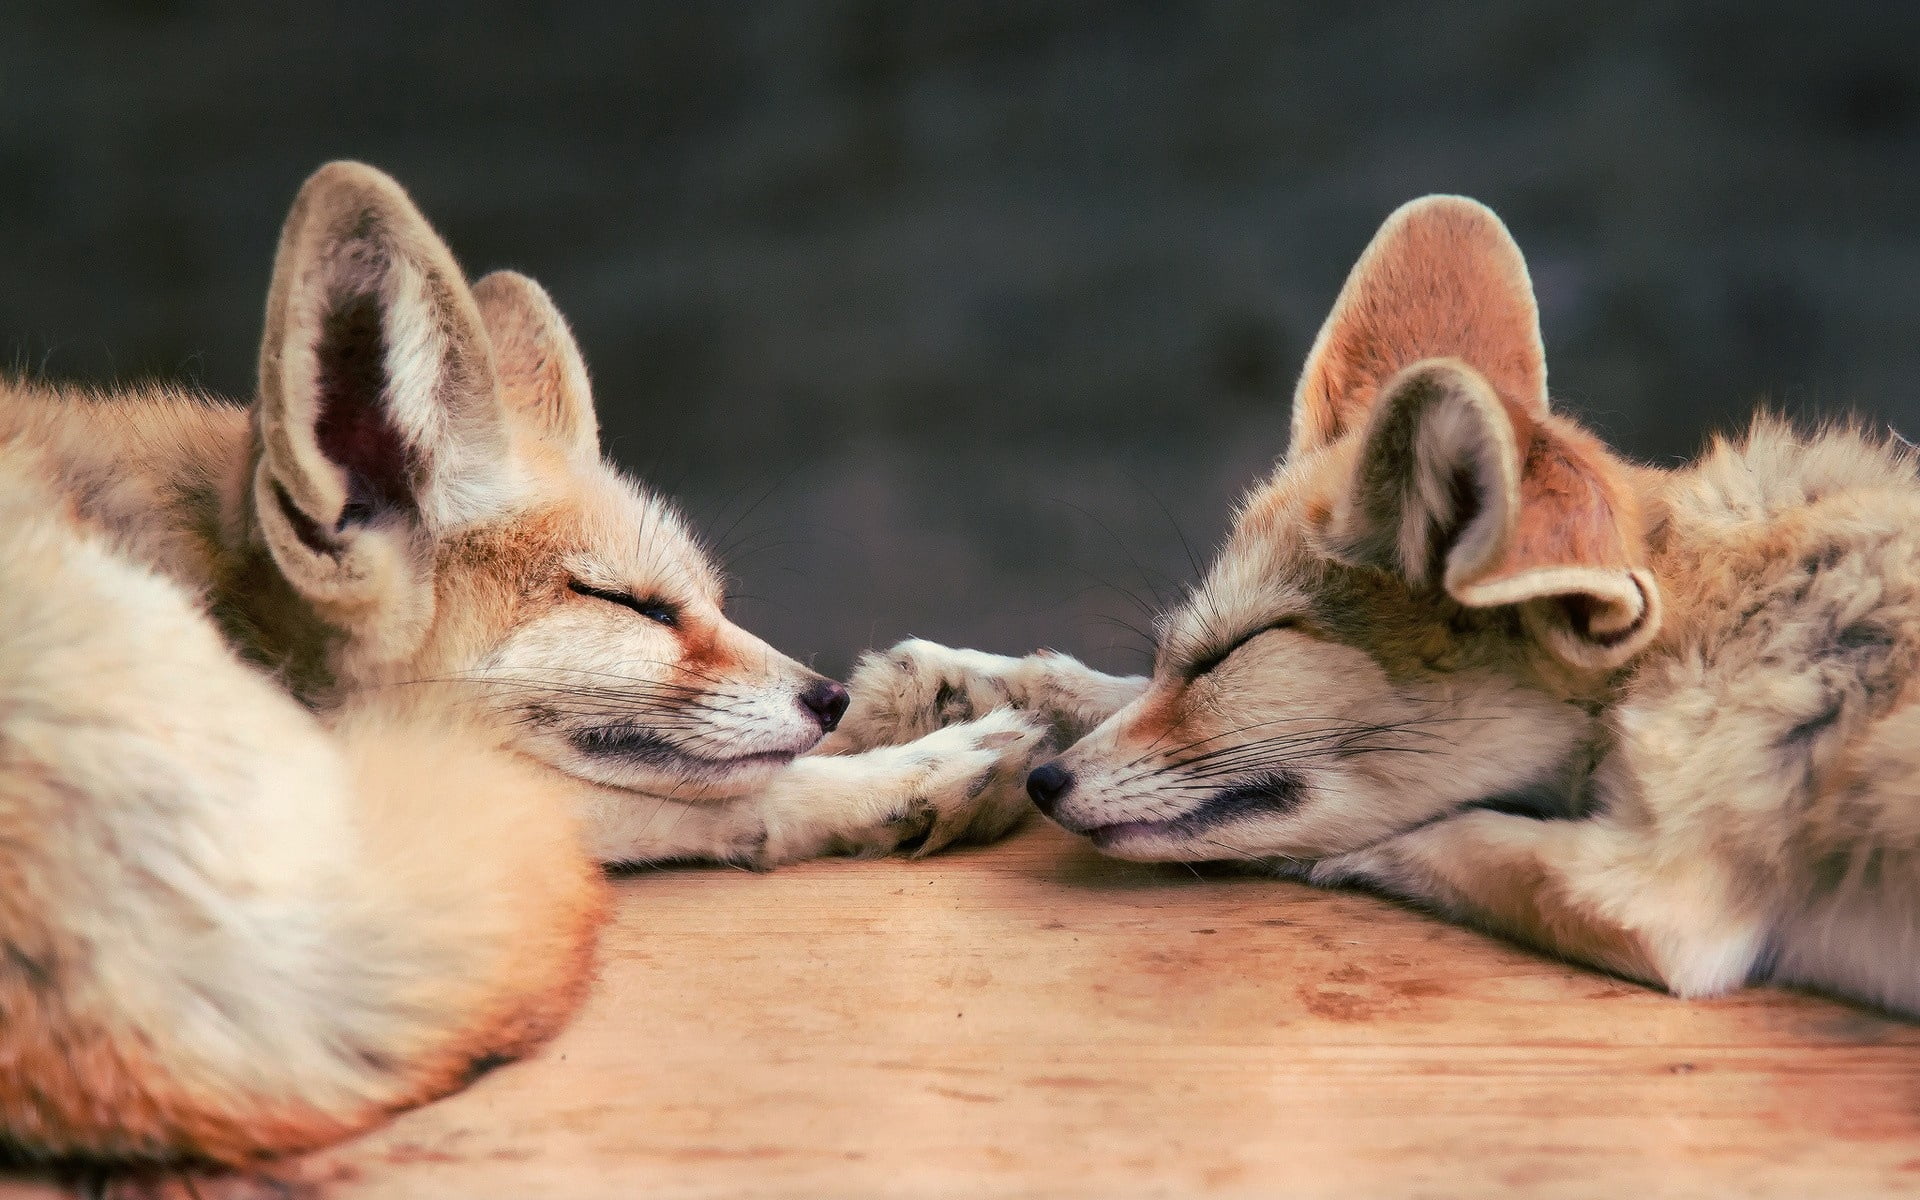 two foxes, fennec fox, couple, down, dream, face, animal, mammal